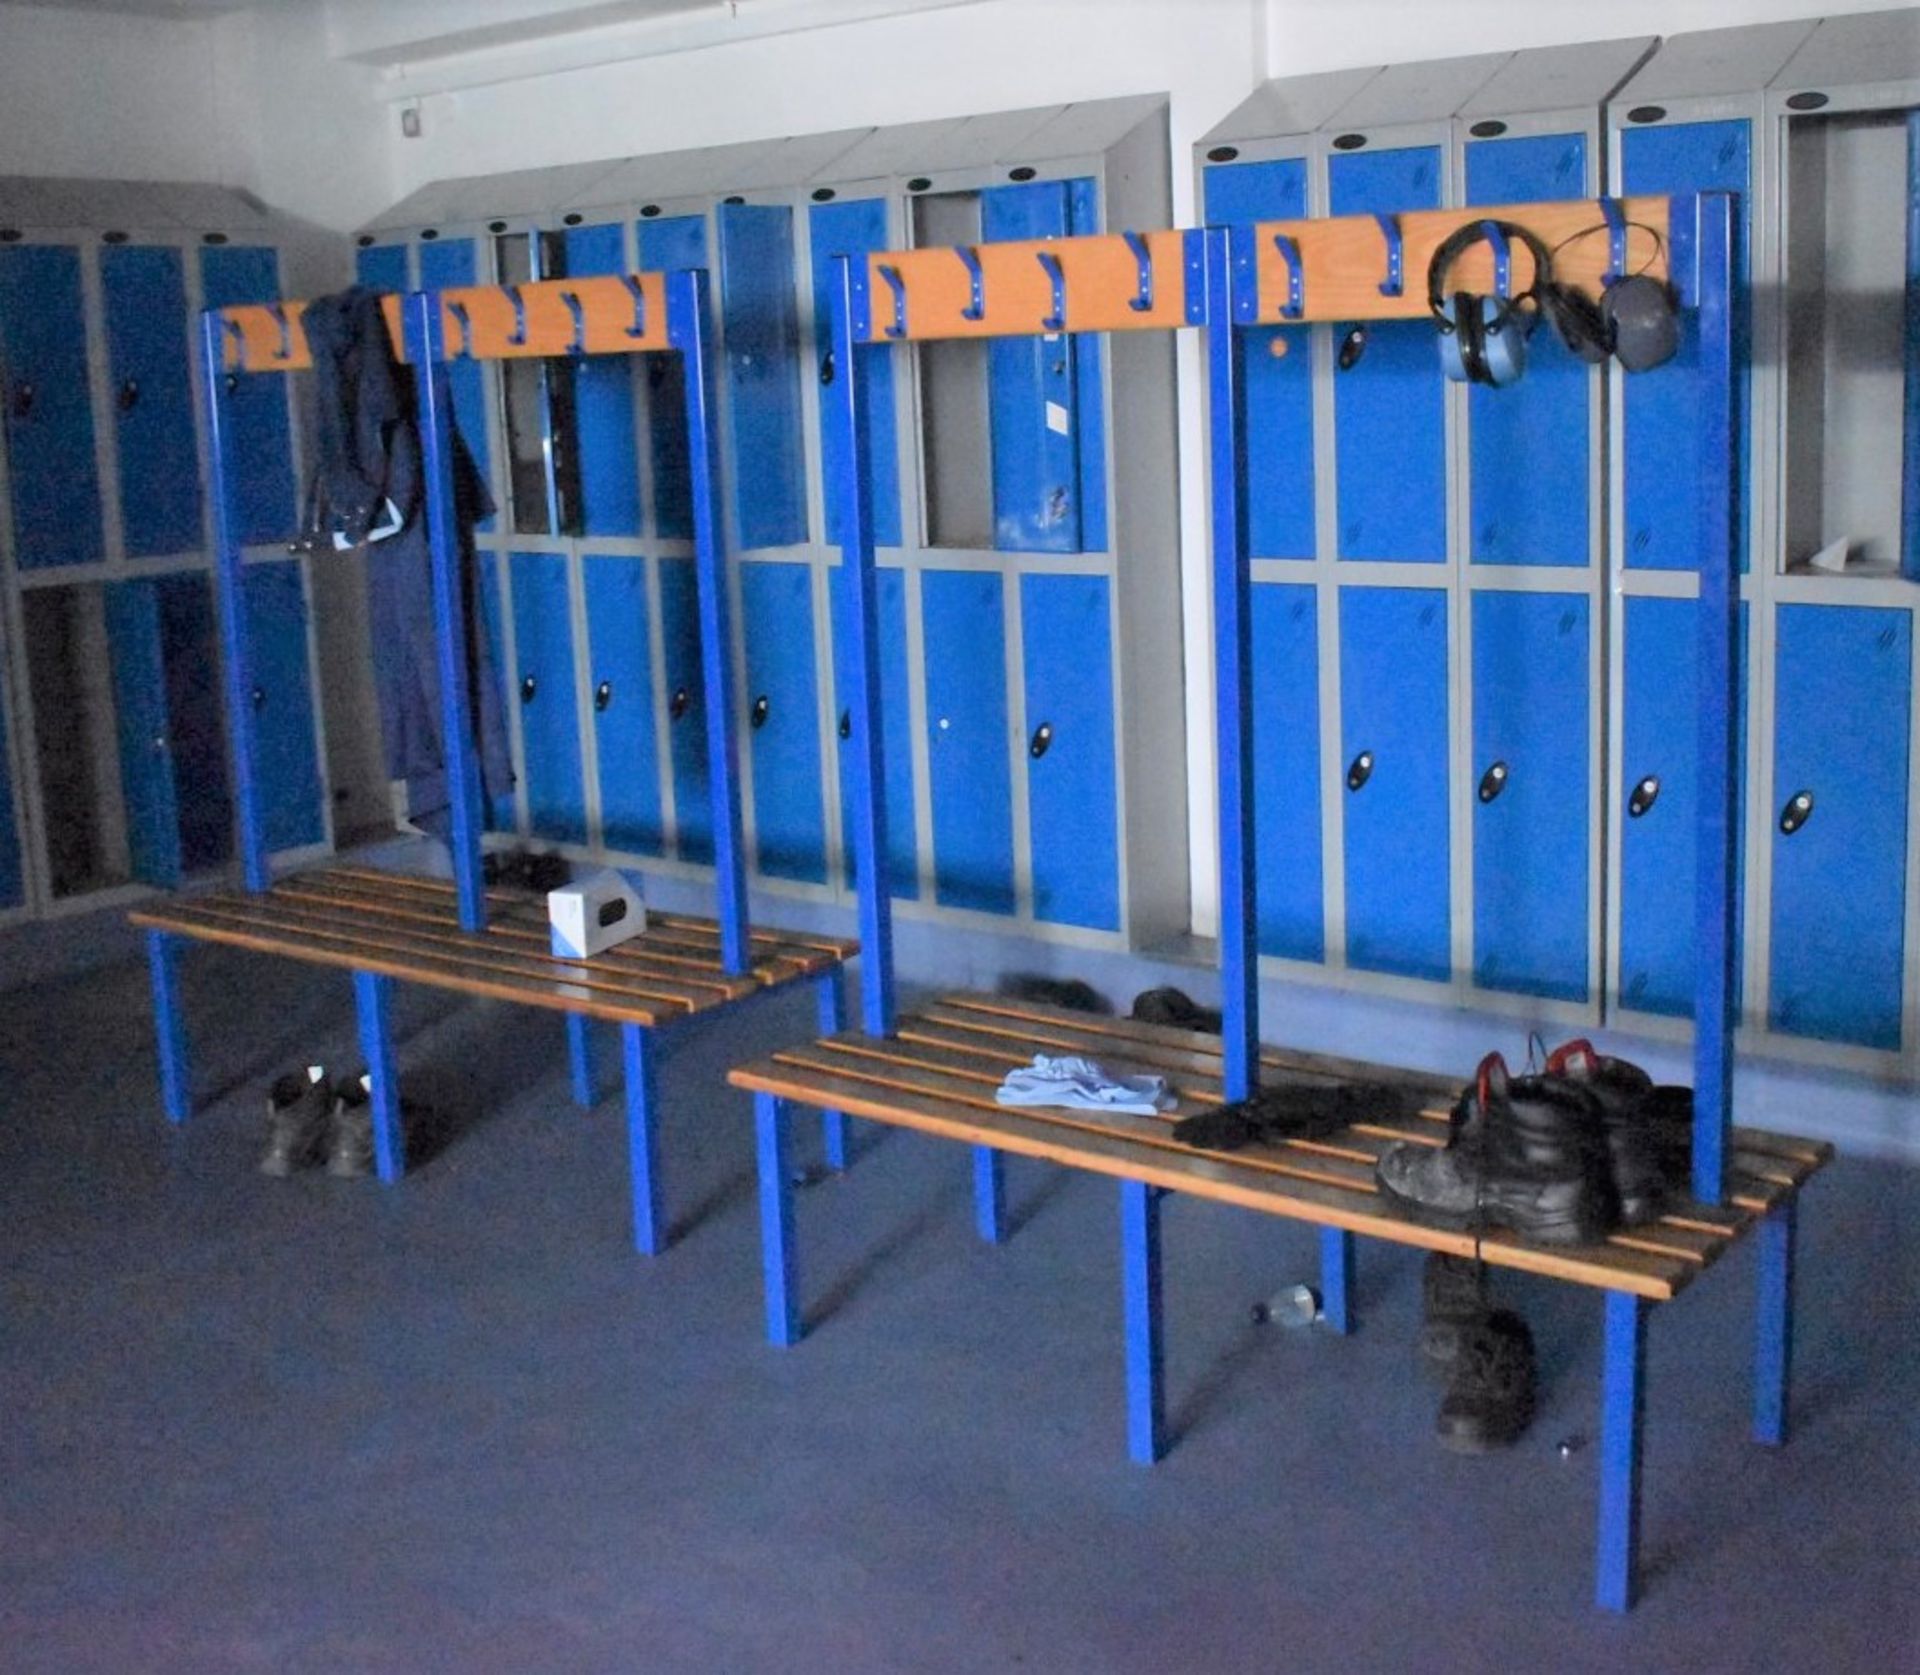 2 x Changing Room Benches in Blue With Coat Hangers - CL529 - Location: Wakefield WF2 IMPORTANT